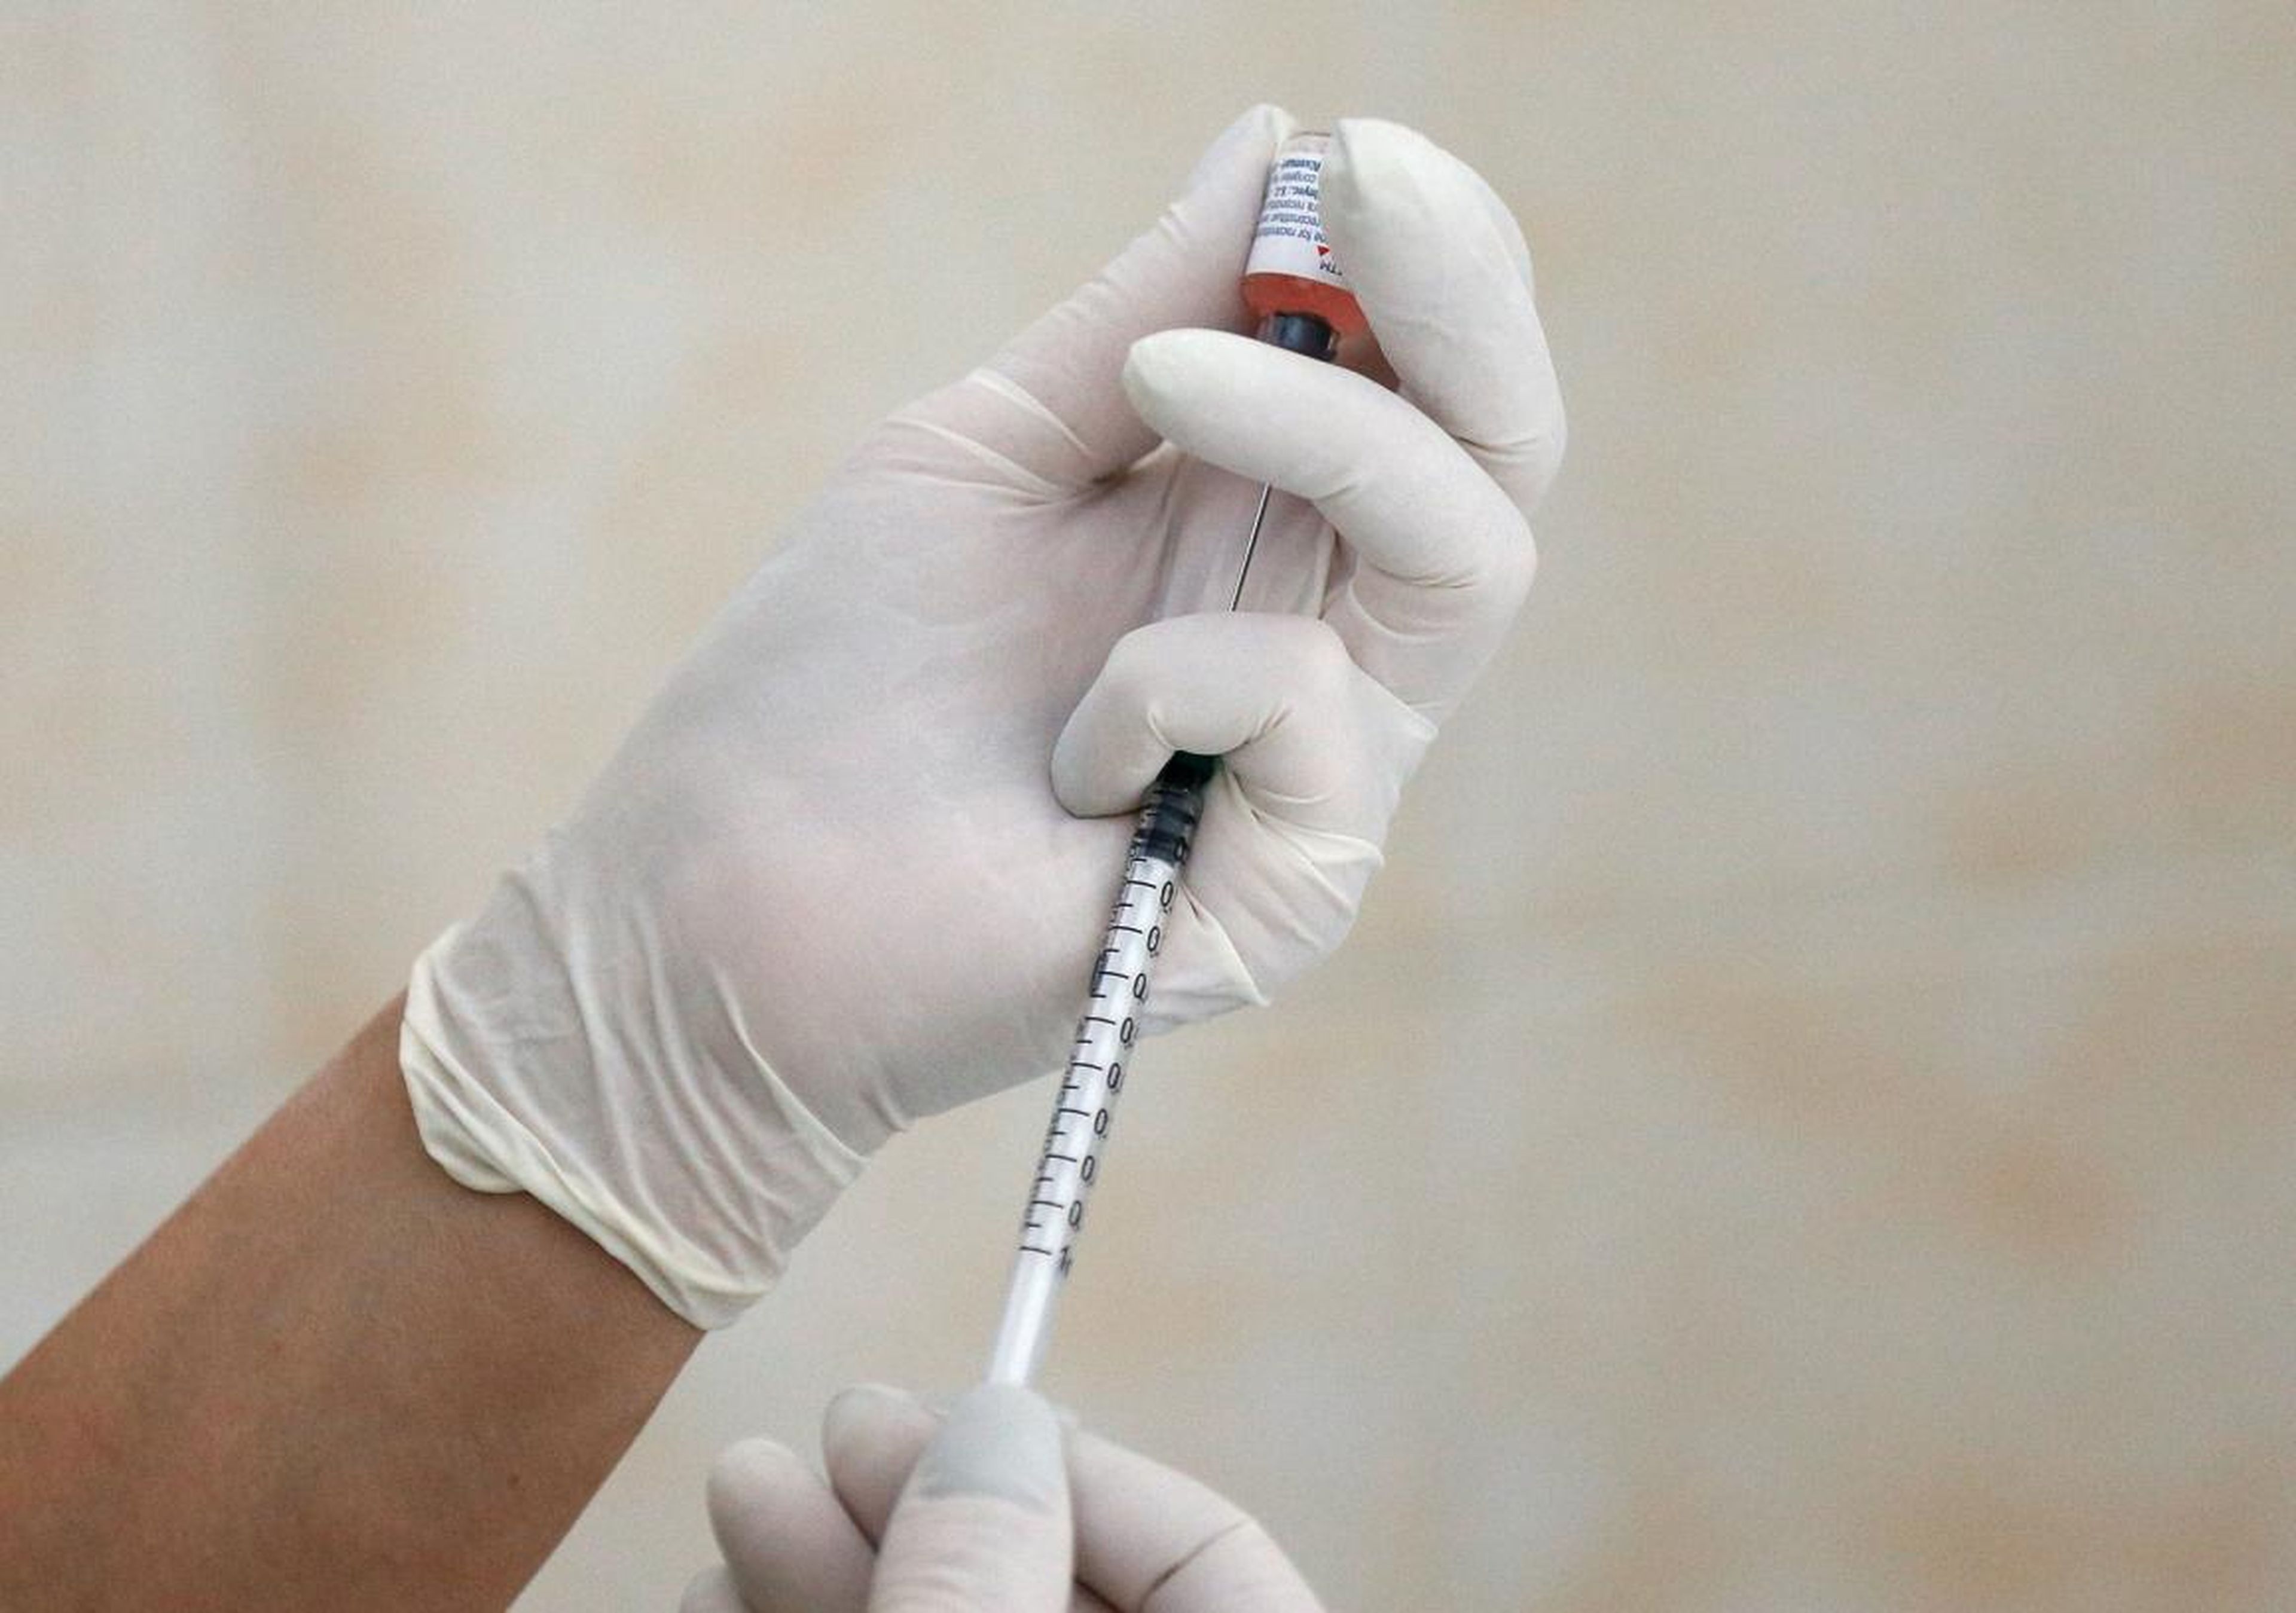 A nurse fills a syringe with a vaccine before administering an injection at a children's clinic in Kiev, Ukraine.